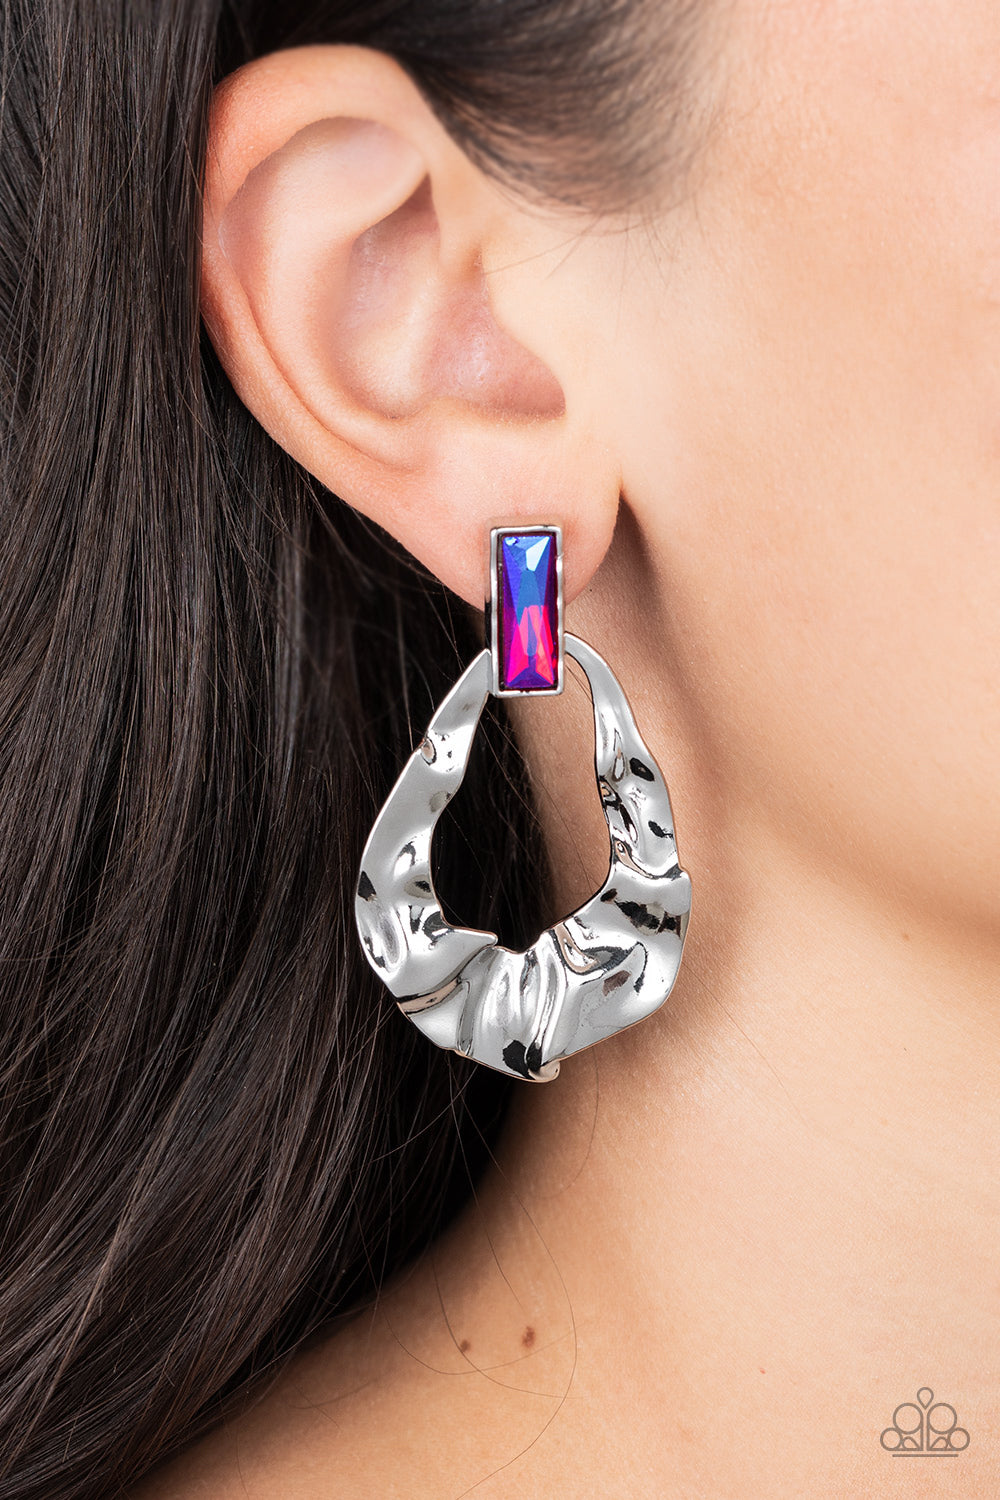 Folds of warped silver delicately gather into an edgy teardrop at the bottom of an emerald cut iridescent pink rhinestone. Earring attaches to a standard post fitting. Due to its prismatic palette, color may vary.  Sold as one pair of post earrings.